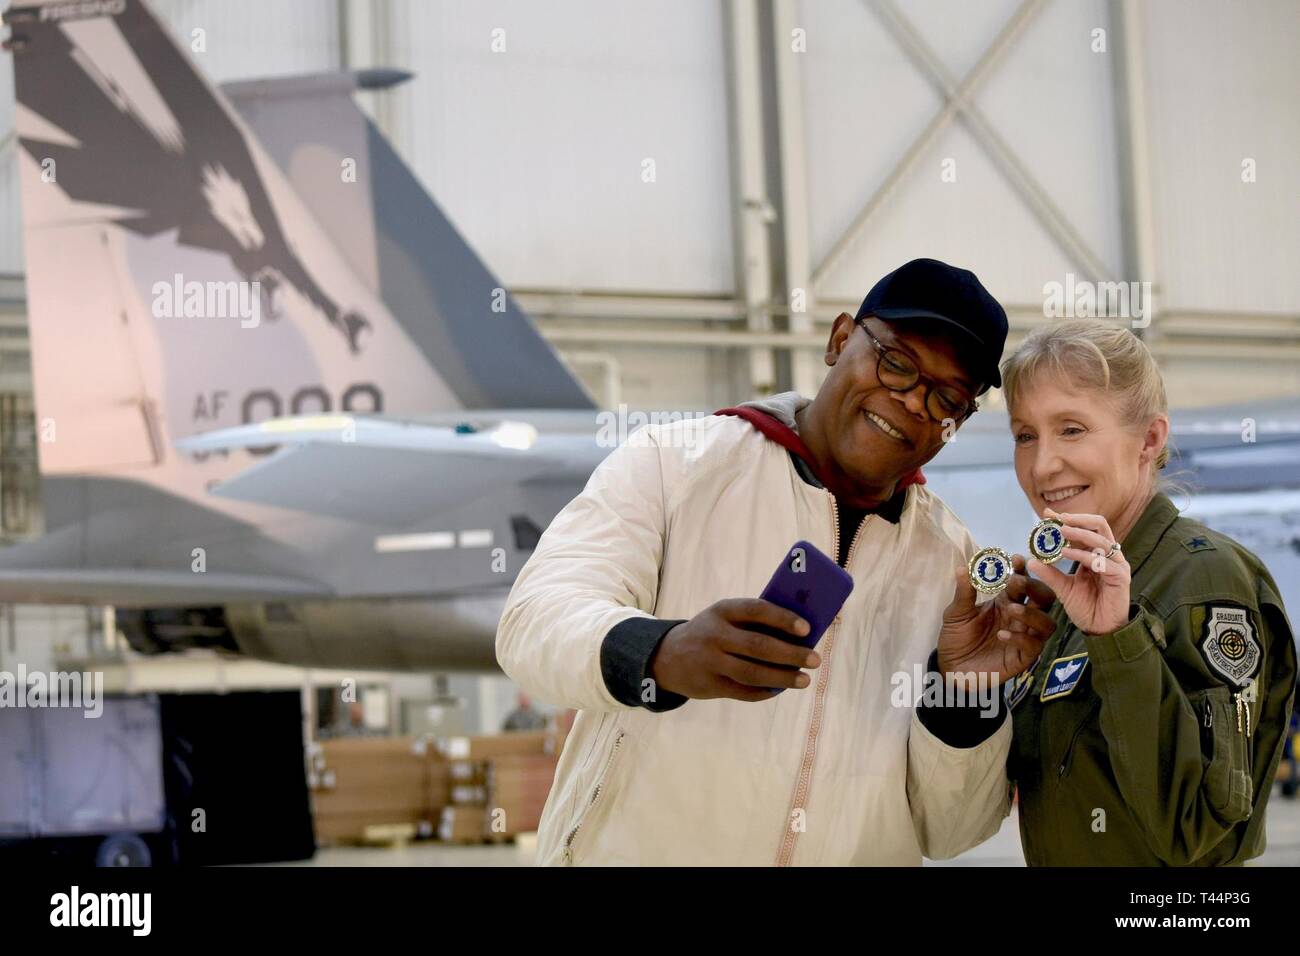 Actor Samuel L. Jackson takes a photo with Gen. Jeannie Leavitt after after receiving a challenge coin from her during a media event for 'Captain Marvel' at Edwards Air Force Base, California, Feb. 20, 2019. Leavitt, the first US Air Force female fighter, was a consultant on the movie, and Jackson reprised his Nick Fury role. Stock Photo